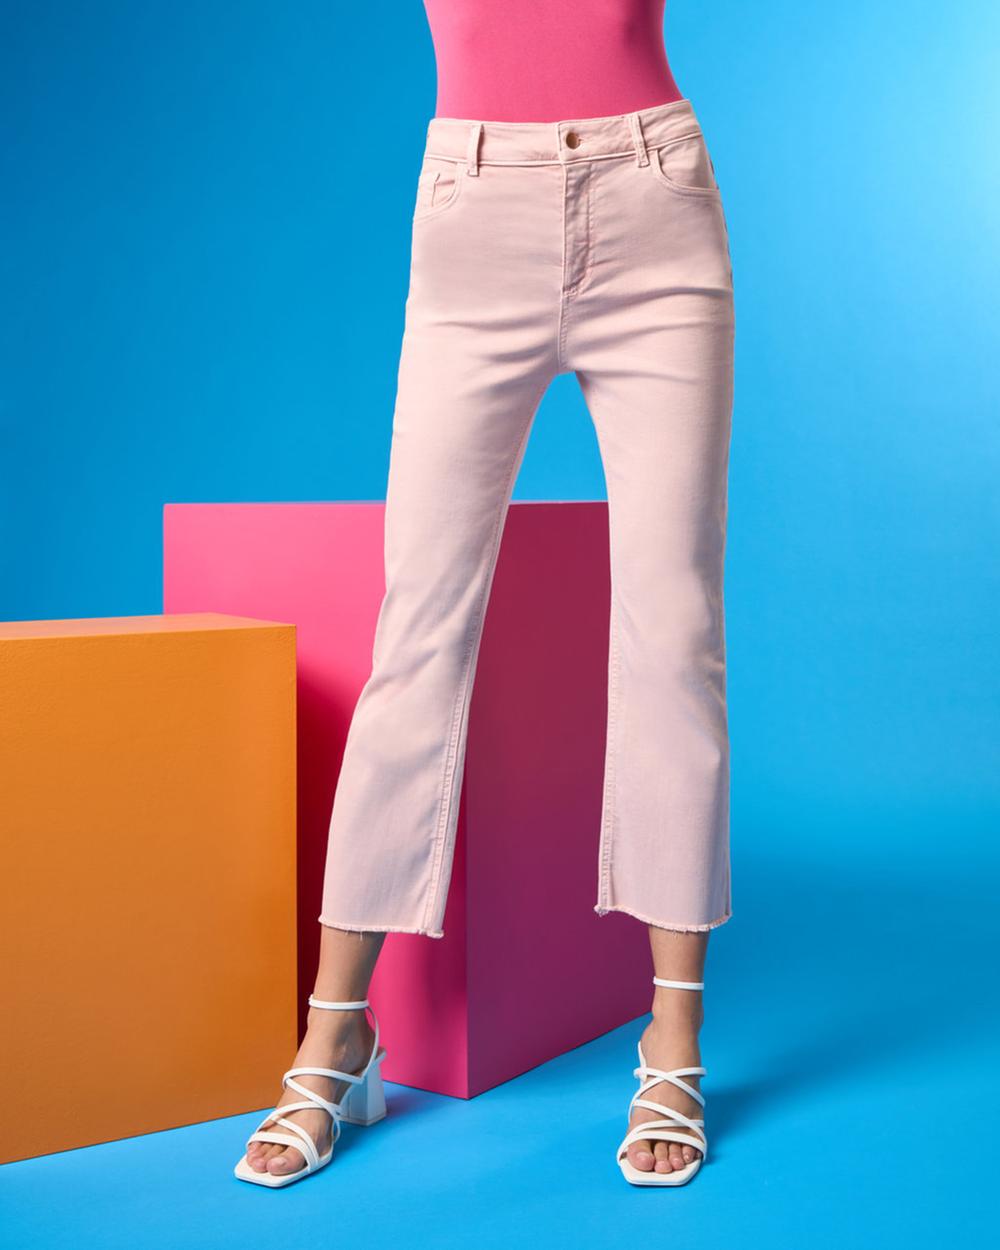 SiSi Cool Jeans Leggings - Summer weight stretch cropped jean leggings (jeggings) with a cut-off fringe edged cuff, zip fly, button closure, front and rear pockets.